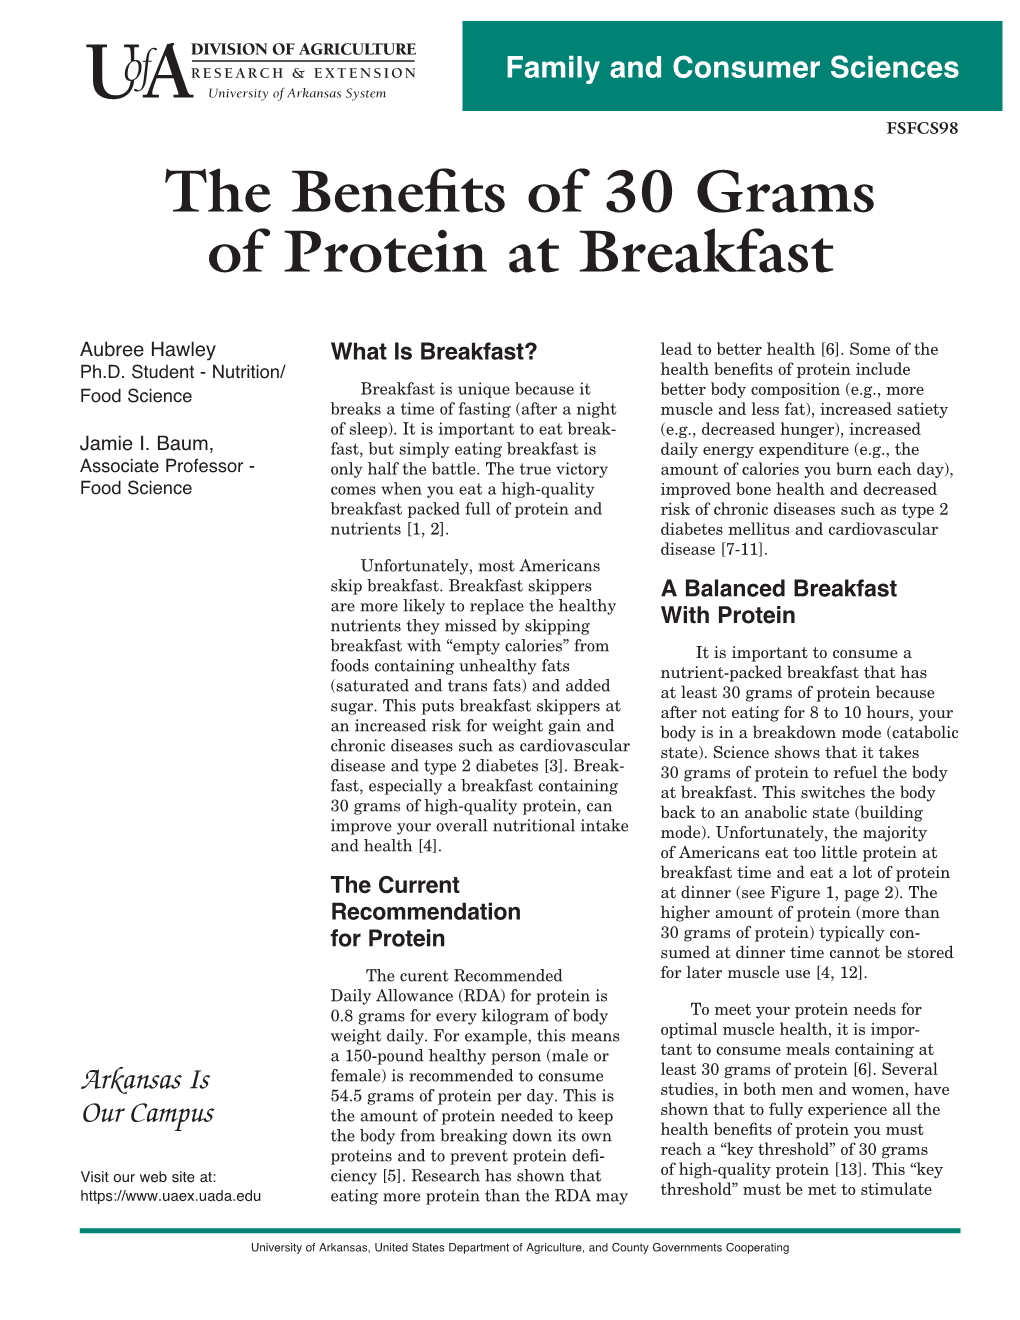 The Benefits of 30 Grams of Protein at Breakfast, FSFCS98